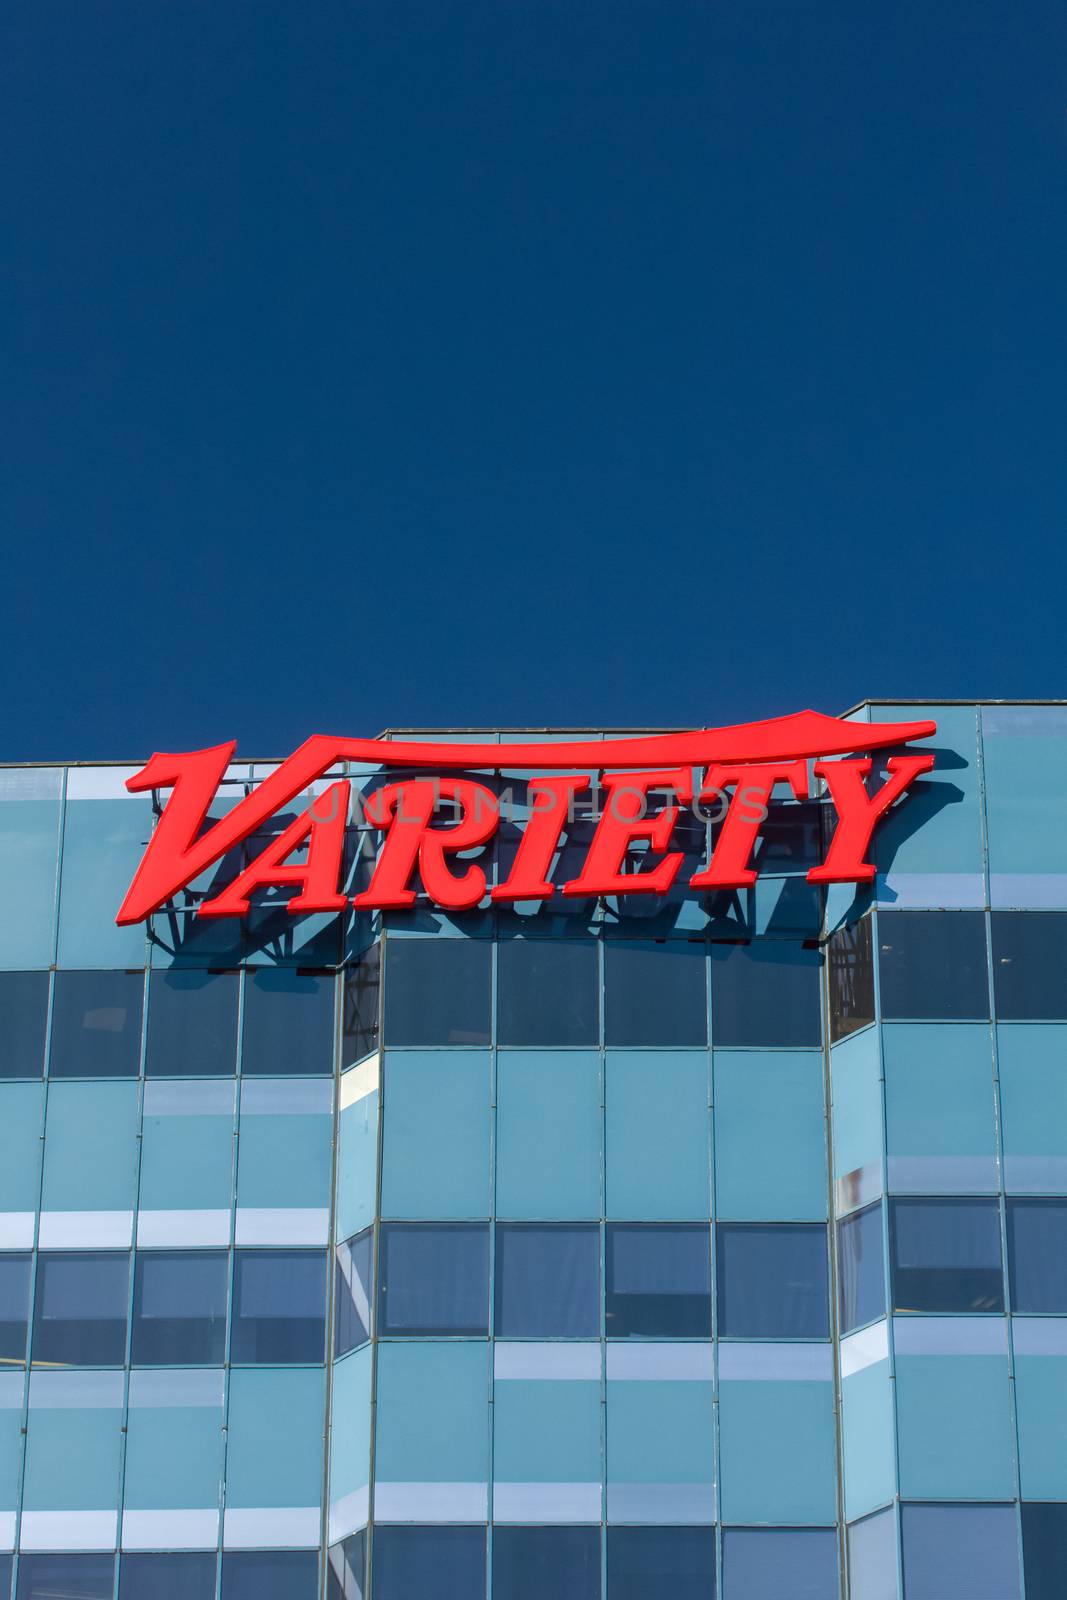 LOS ANGELES, CA/USA - NOVEMBER 11, 2015: Variety Magazine Office Building and Logo. Variety is a weekly American entertainment trade magazine.